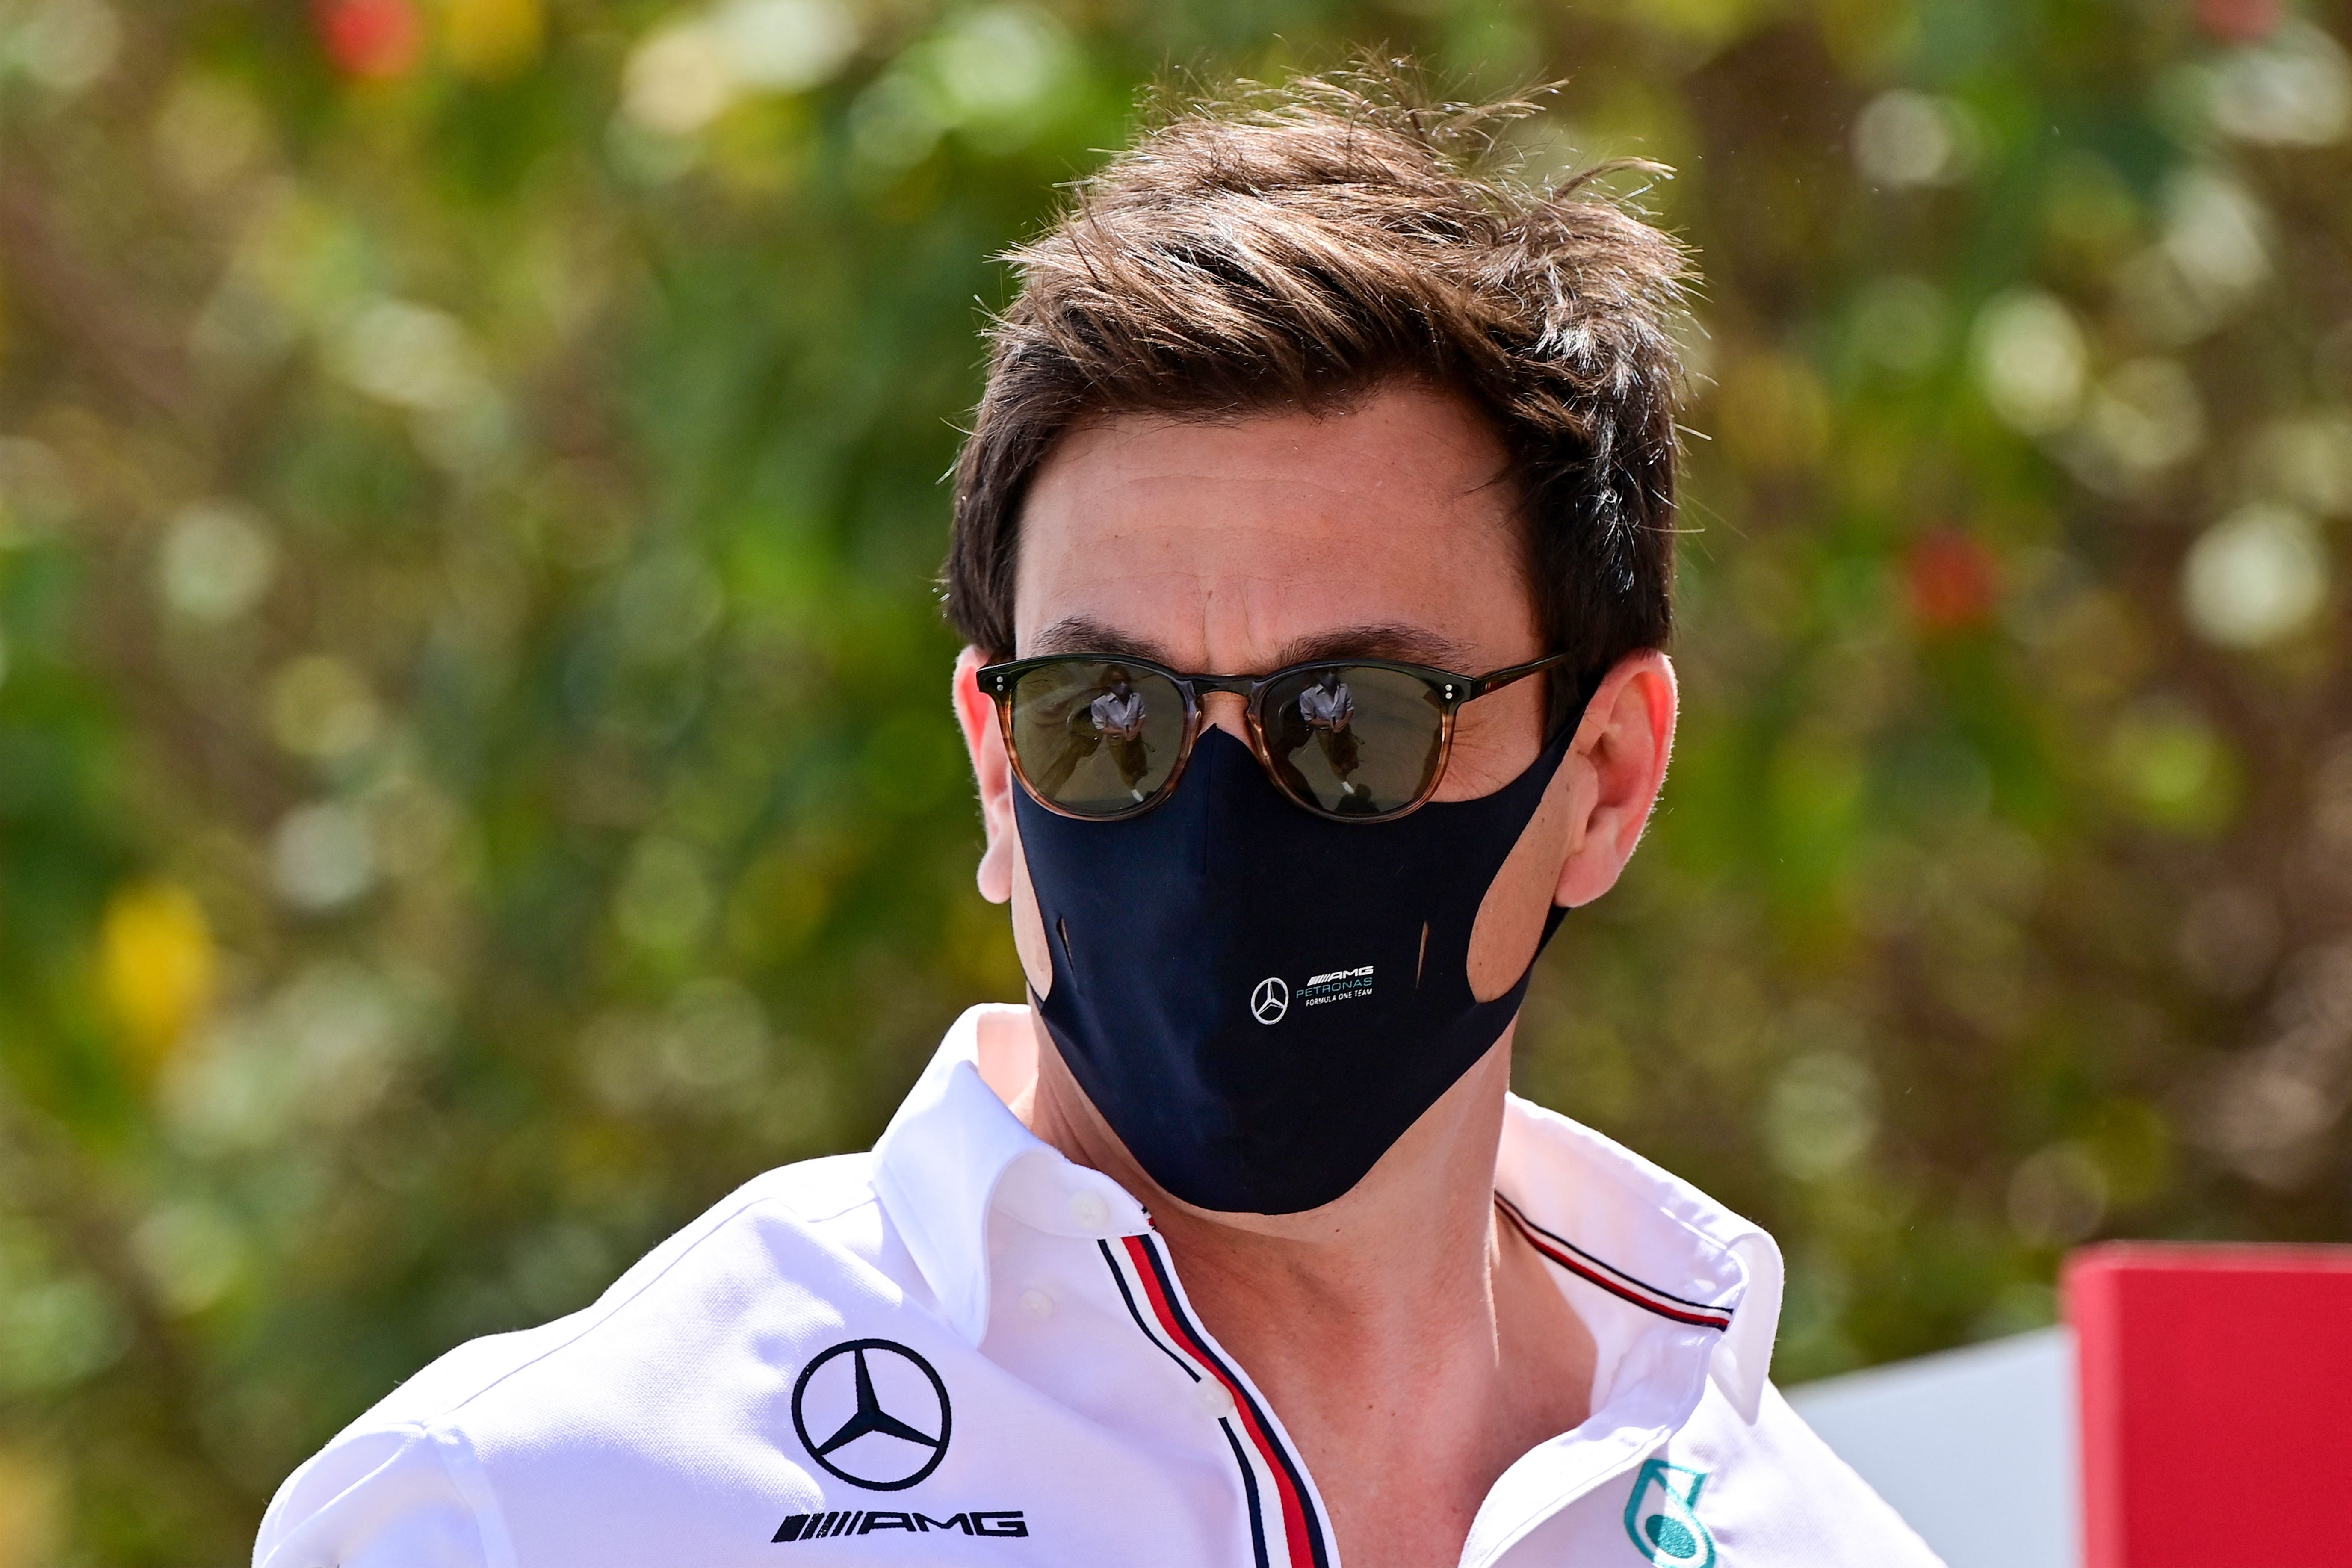 Toto Wolff said he will talk to Russell and address the issue